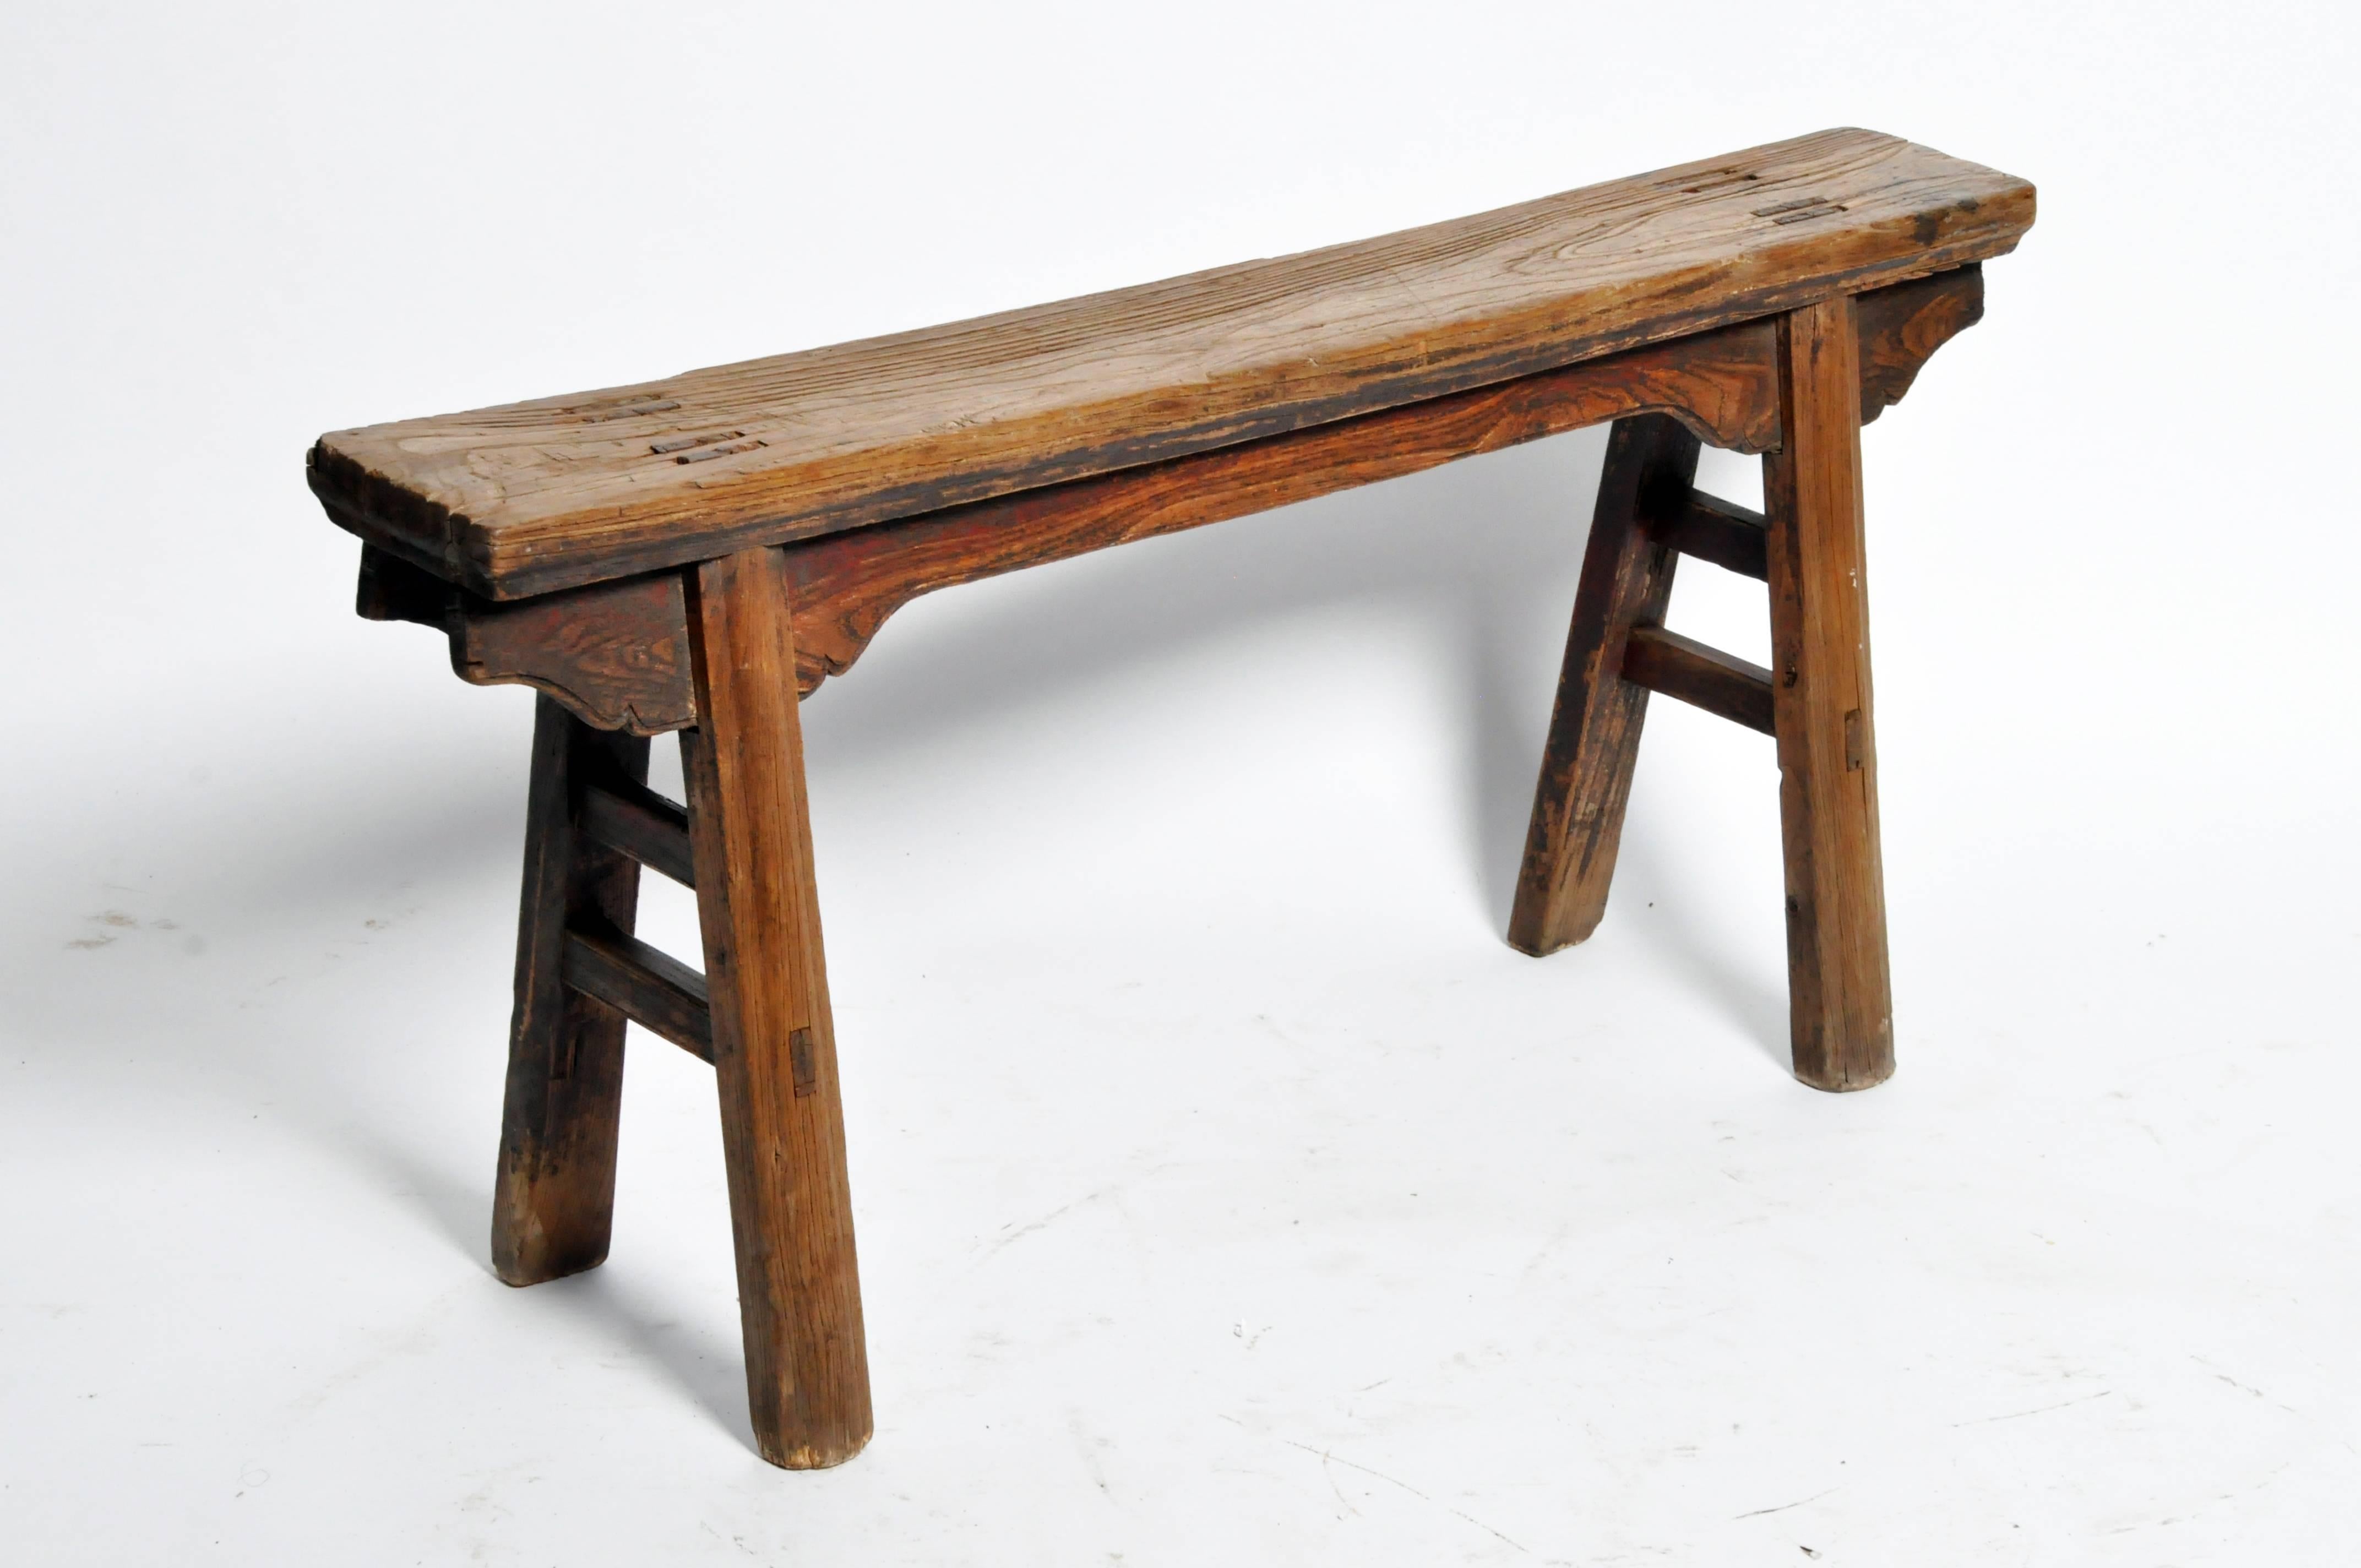 An elmwood bench from Shanxi, China that dates to the late Qing dynasty. The rectangular legs with recessed molding and carved spandrels add simple detailing to quality mortise and tenon construction.